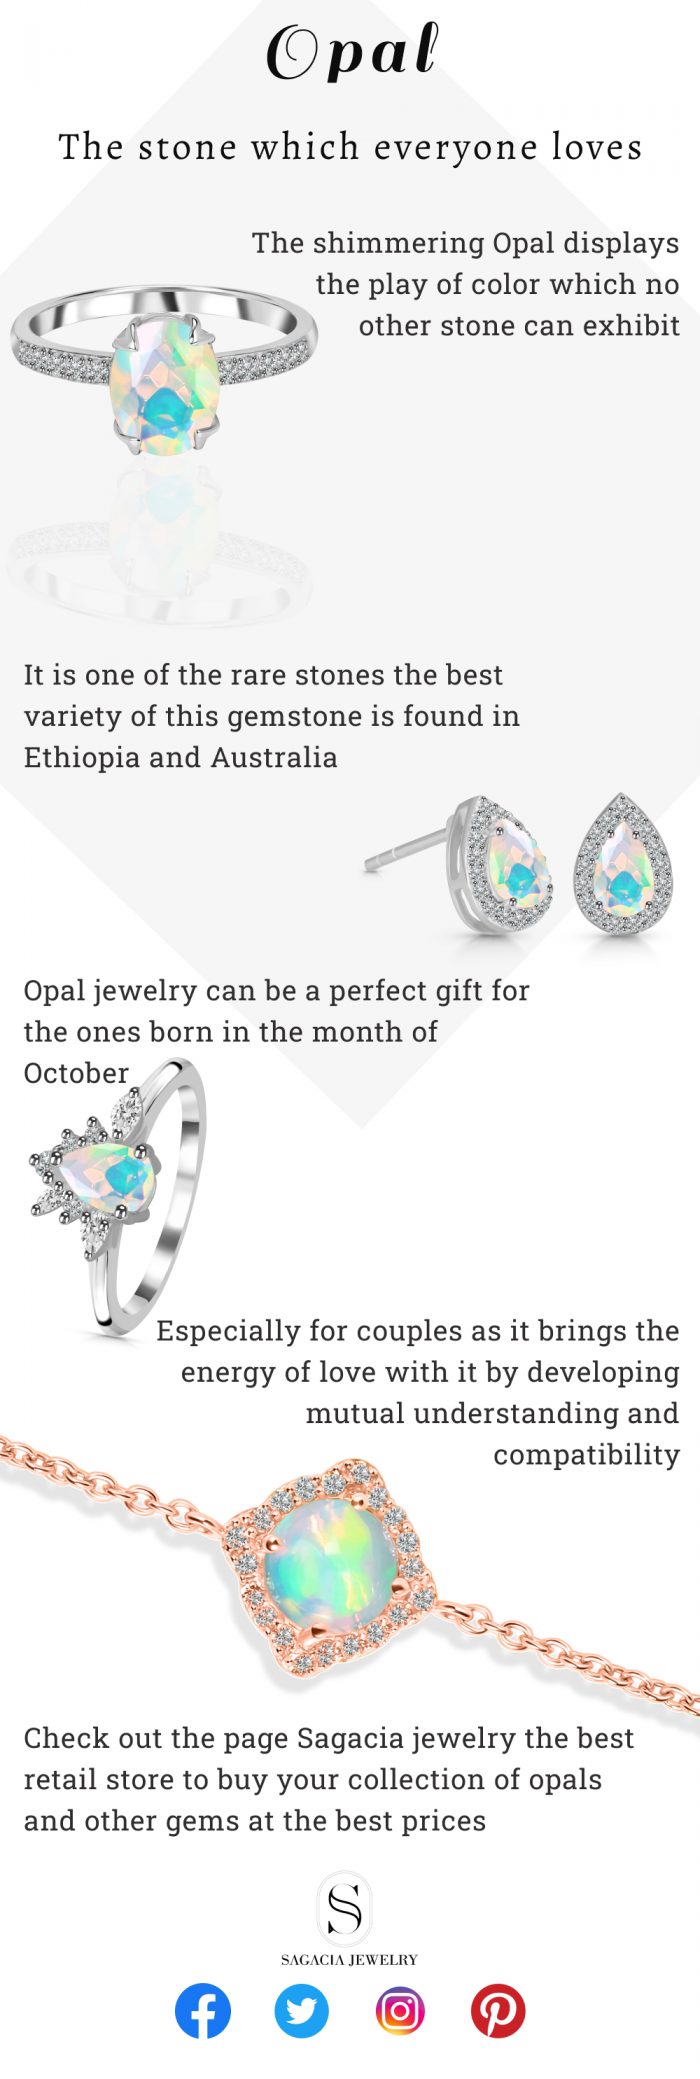 Opal – The Stone Which Everyone Loves